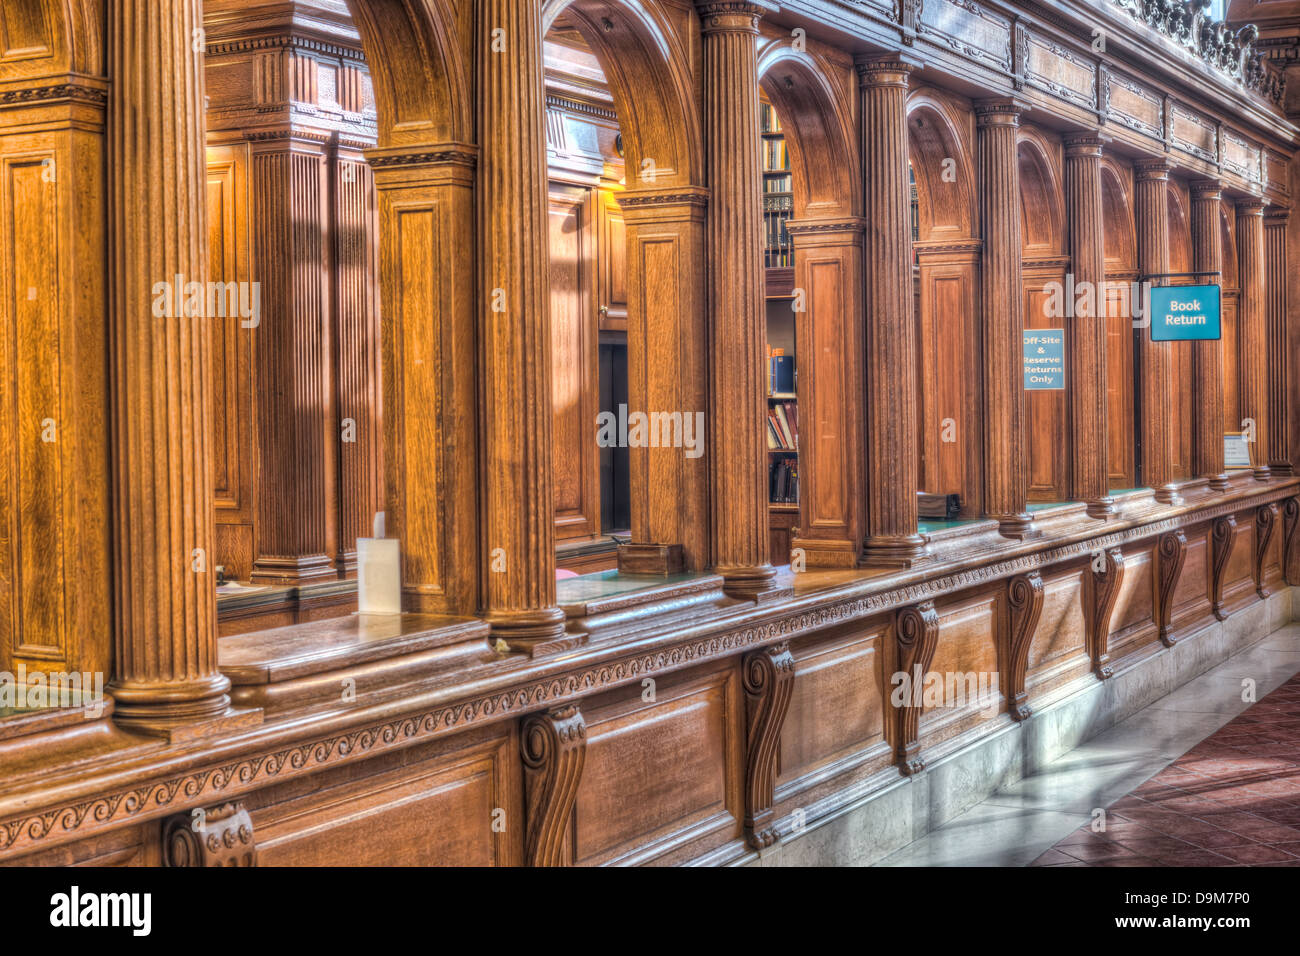 The book return at the center of Rose Main Reading Room in the main branch of the New York Public Library Stock Photo